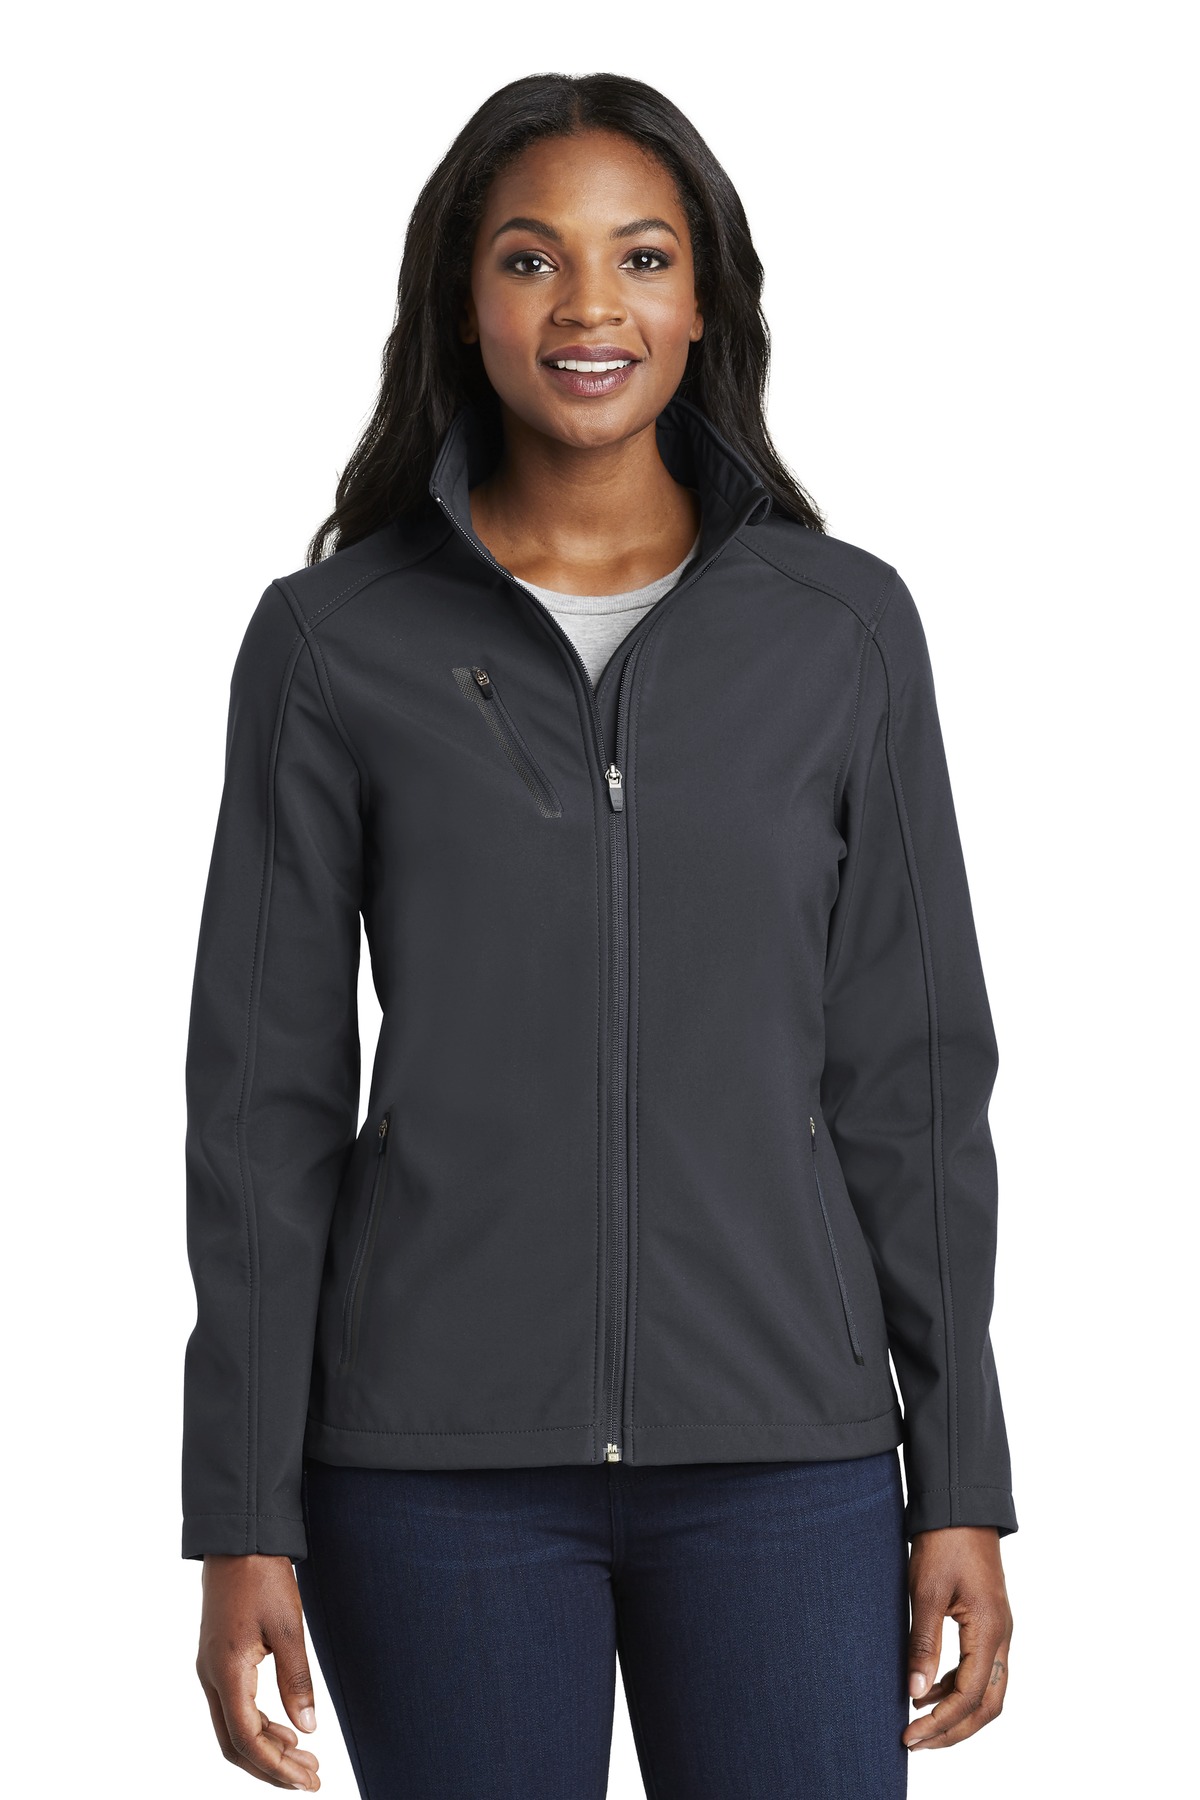 Port Authority Ladies Outerwear for Hospitality ® Ladies Welded Soft Shell Jacket.-Port Authority